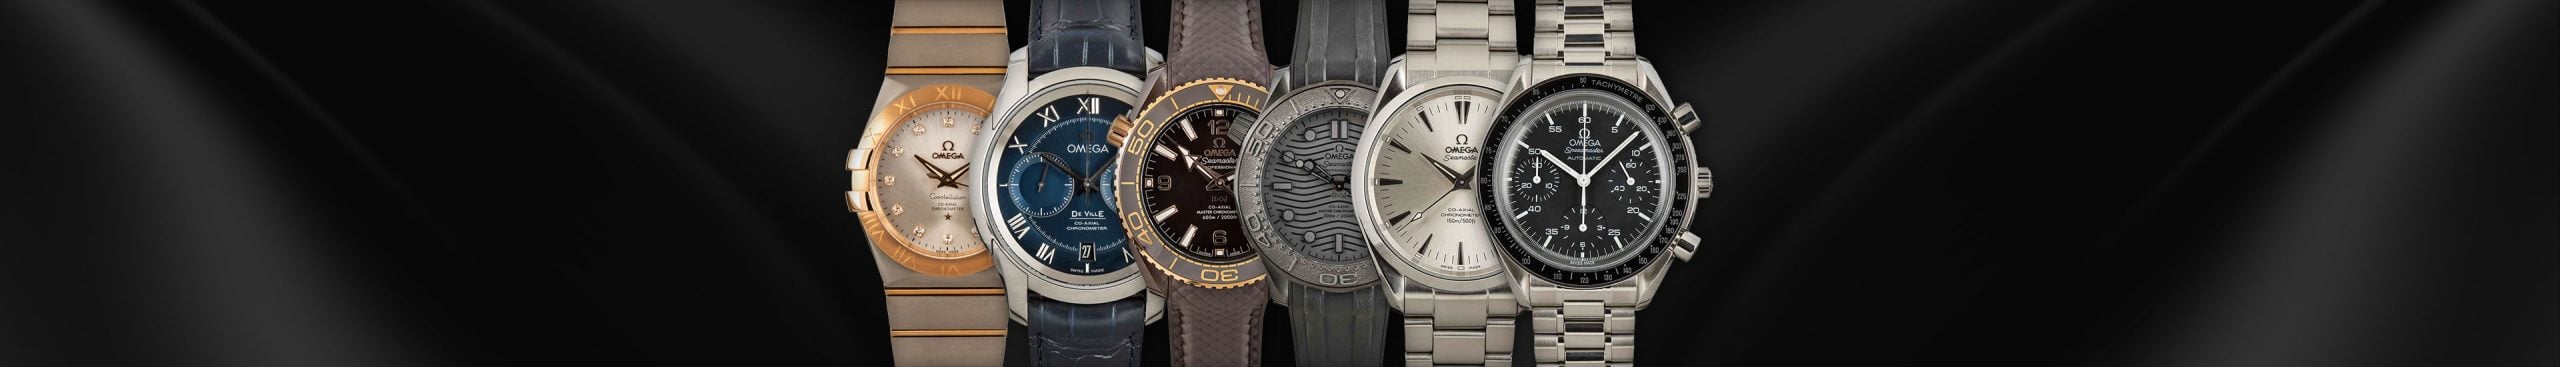 The History of Minerva Watch Movements - Oracle Time